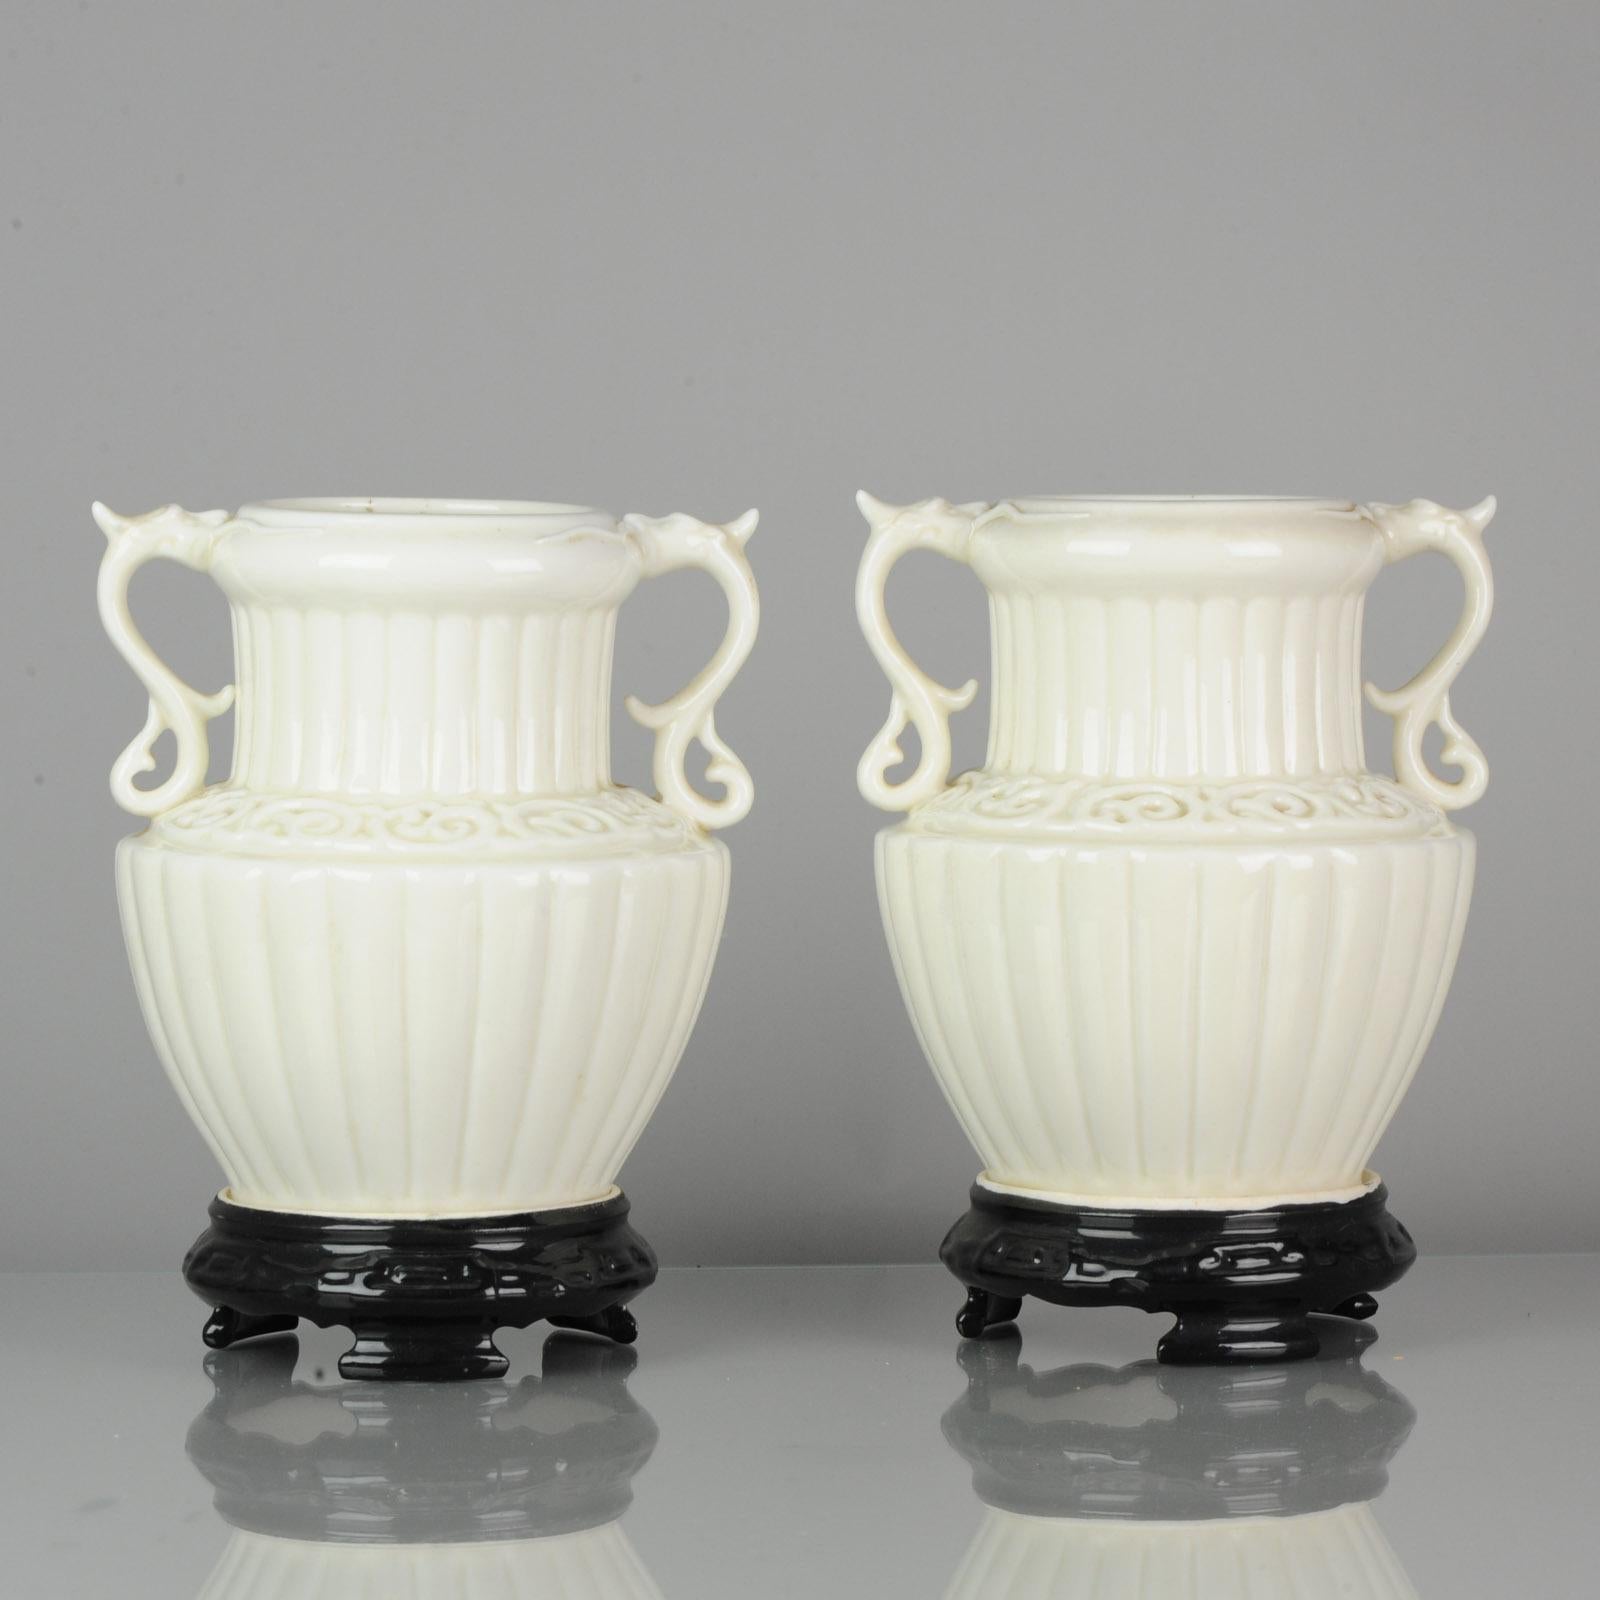 Pair of Chinese 1978 Dehua Monochrome White Porcelain Vases China PRoC For Sale 6